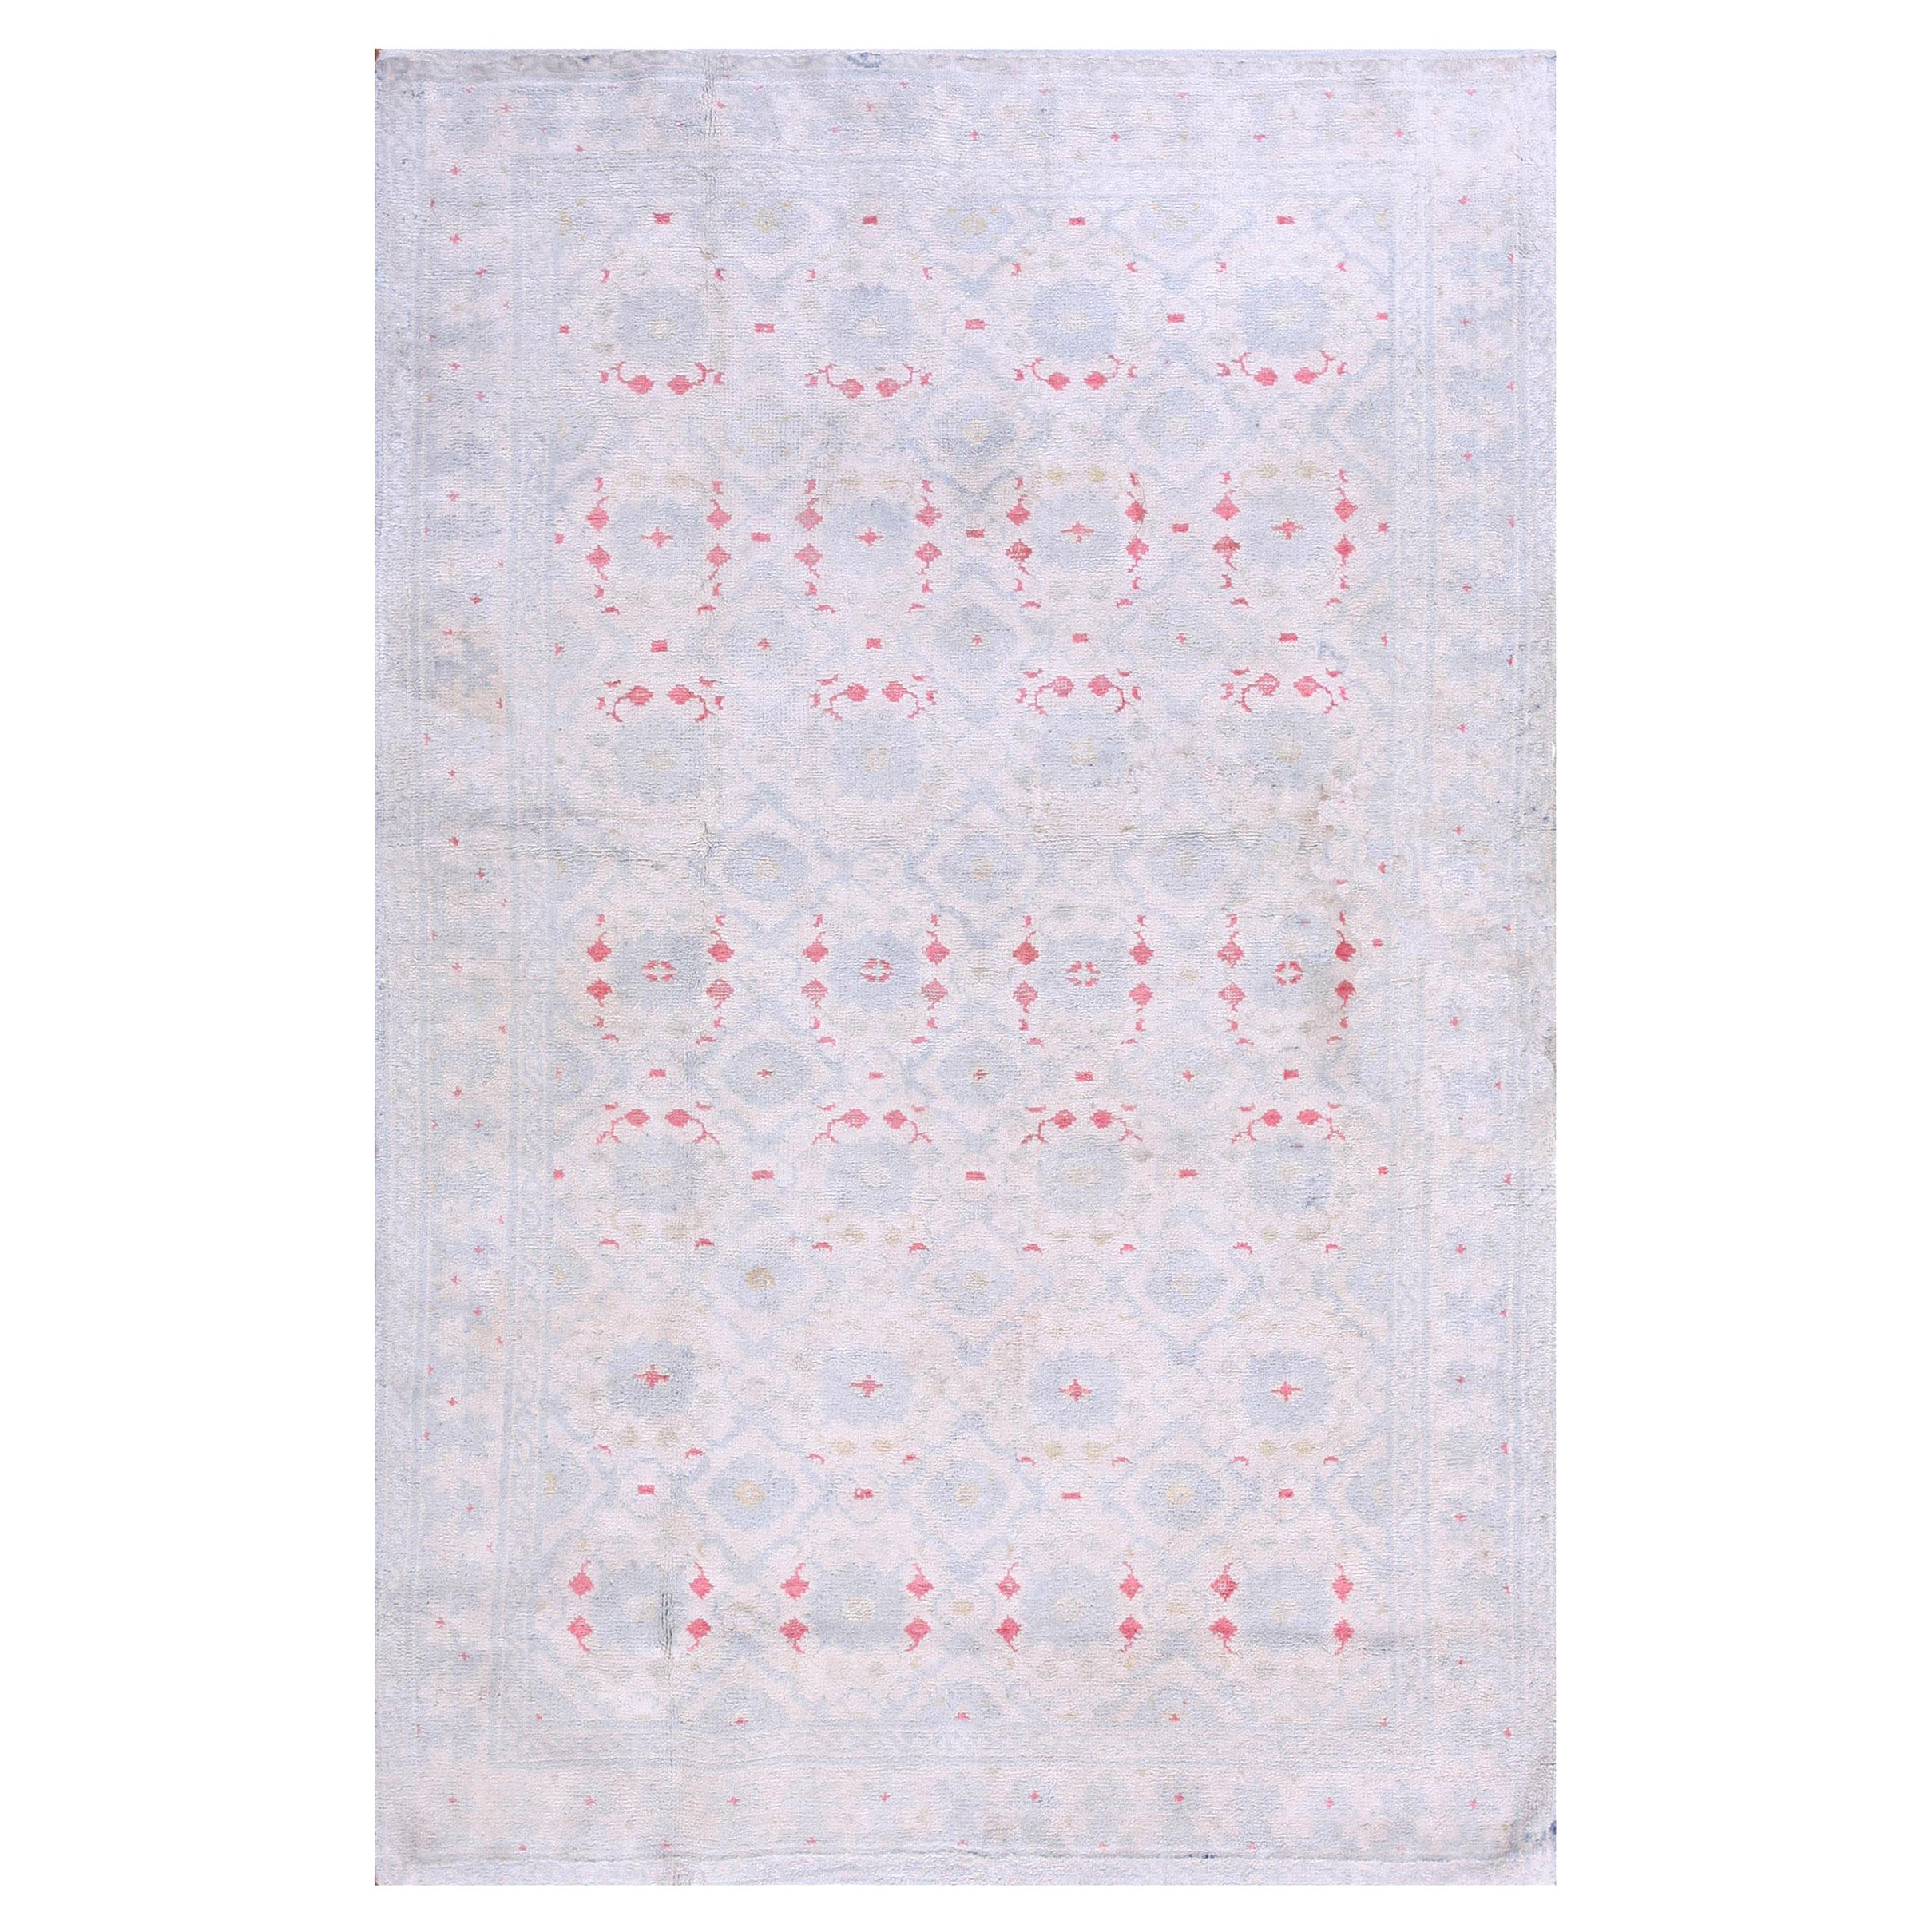 Hand-Knotted Tapis d'Inde